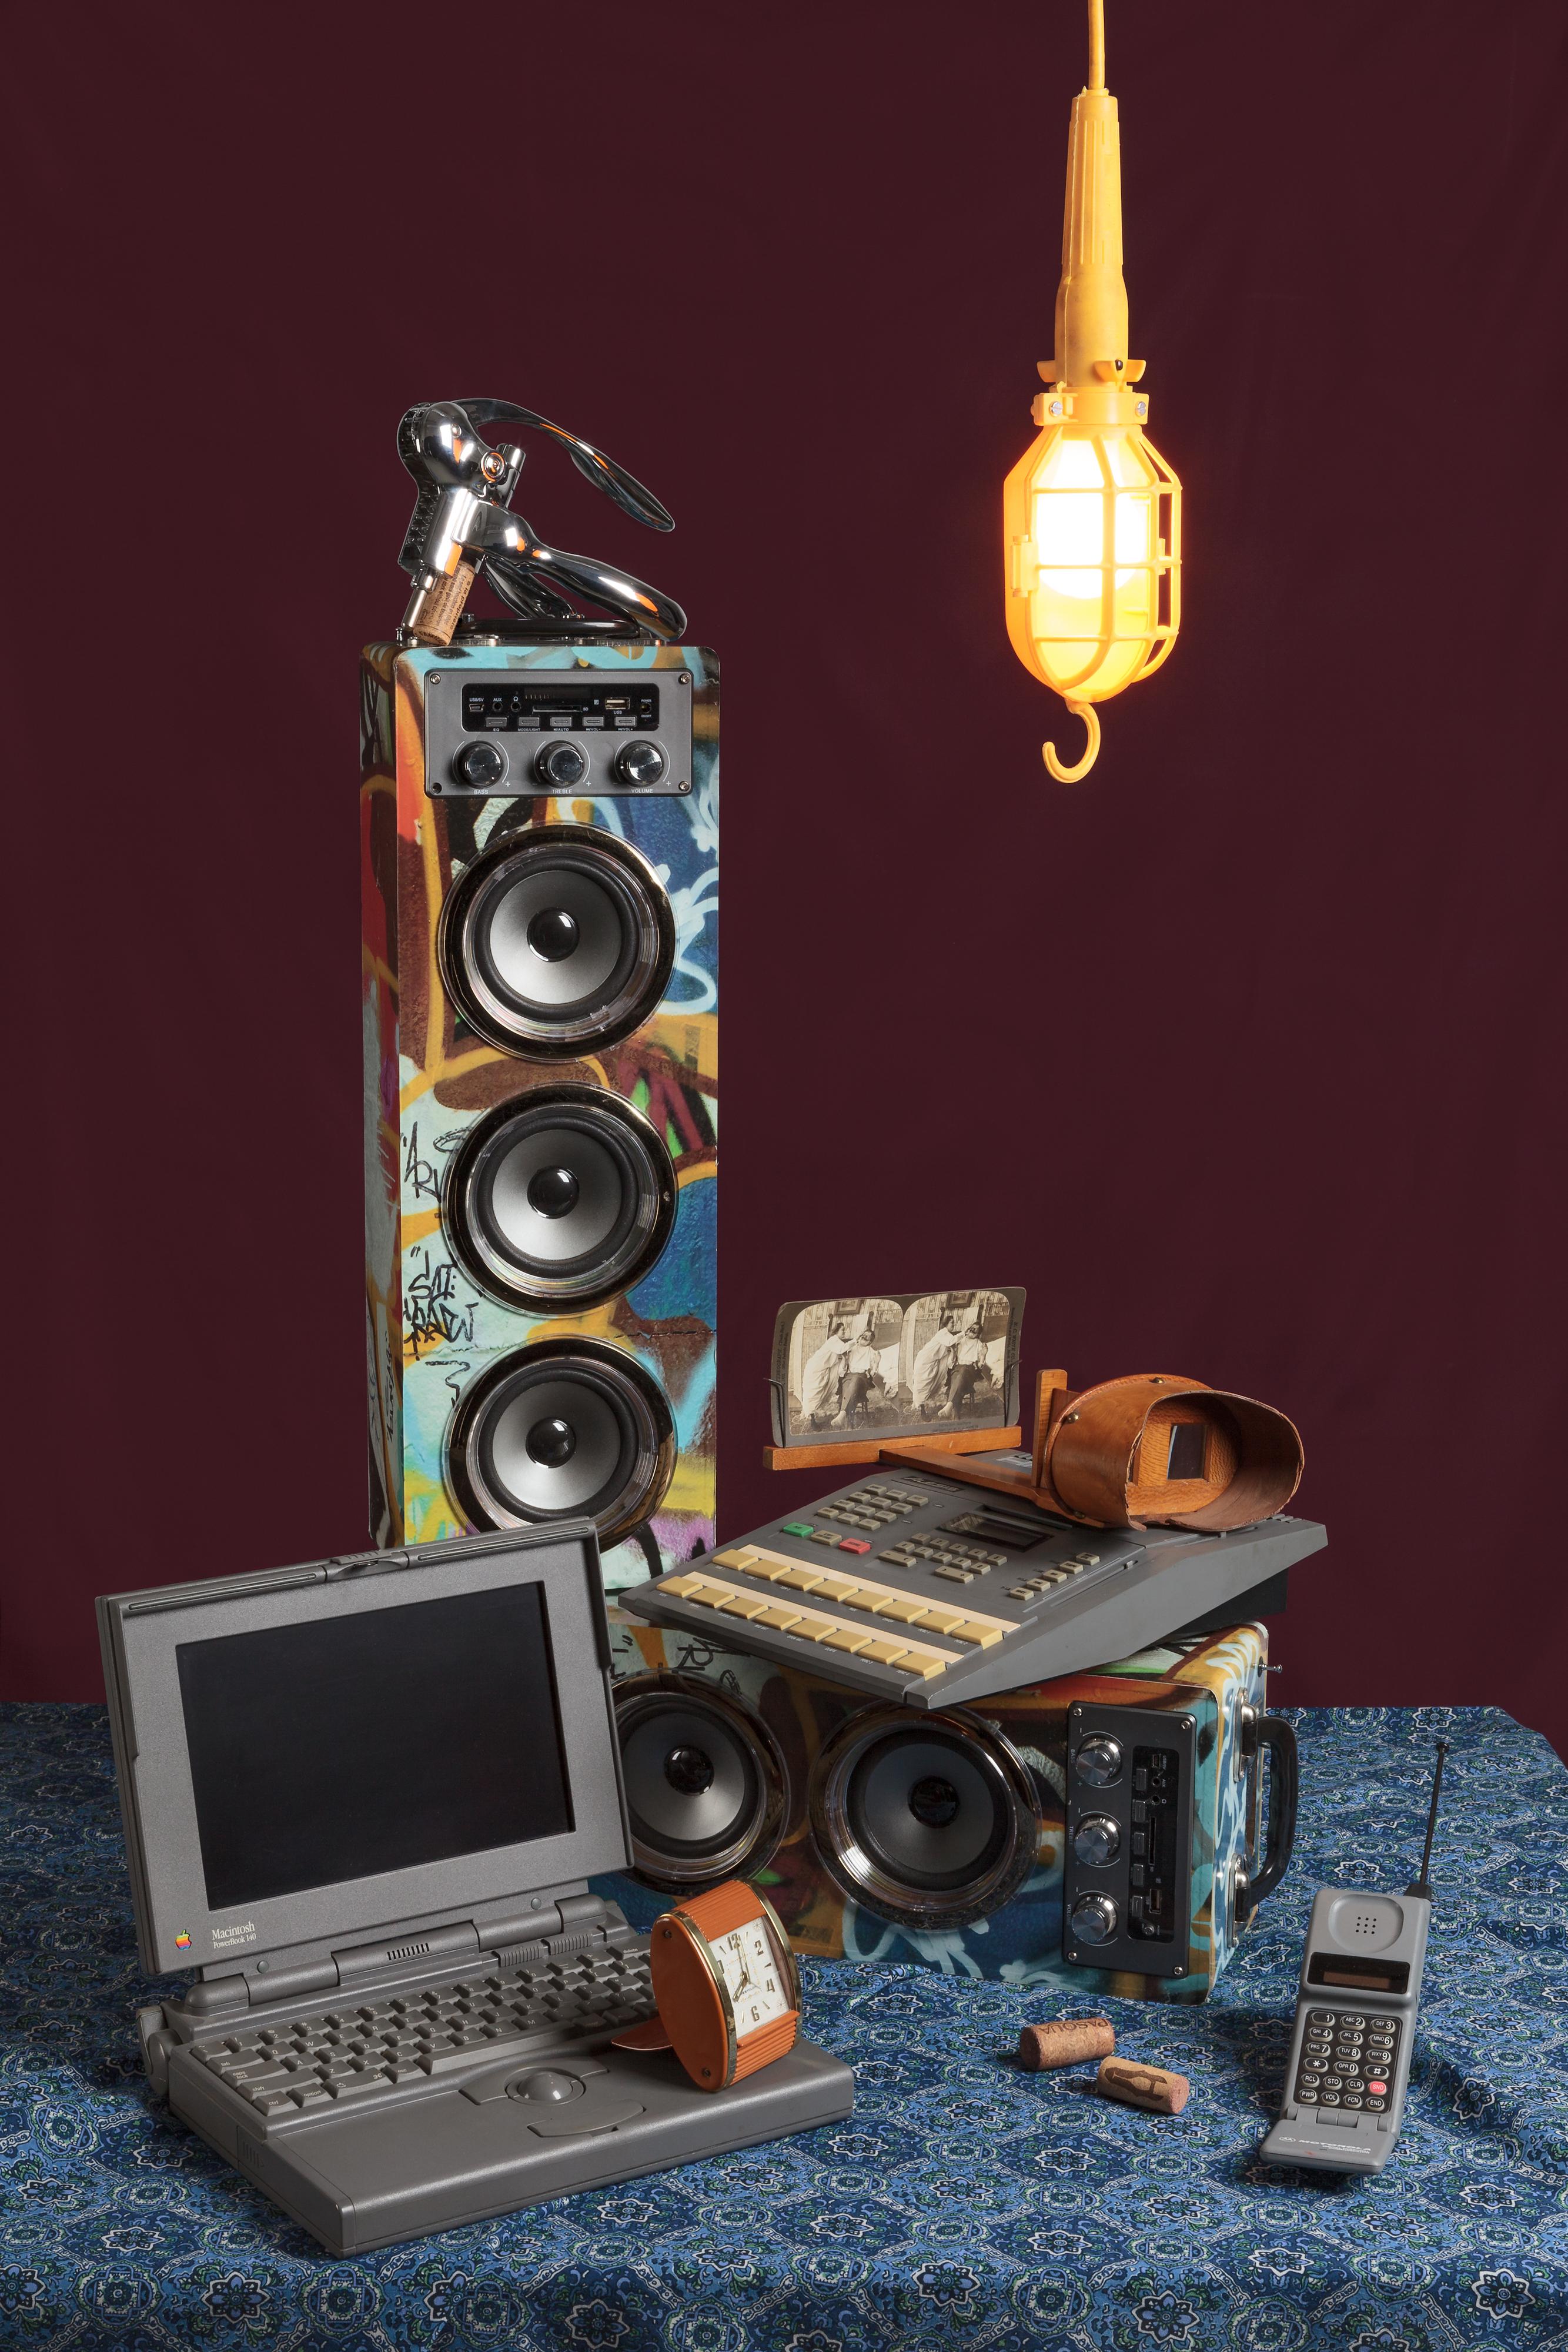 Jeanette May Color Photograph - "Tech Vanitas: Graffiti Speakers" Contemporary Still-life Photo of Vintage Tech